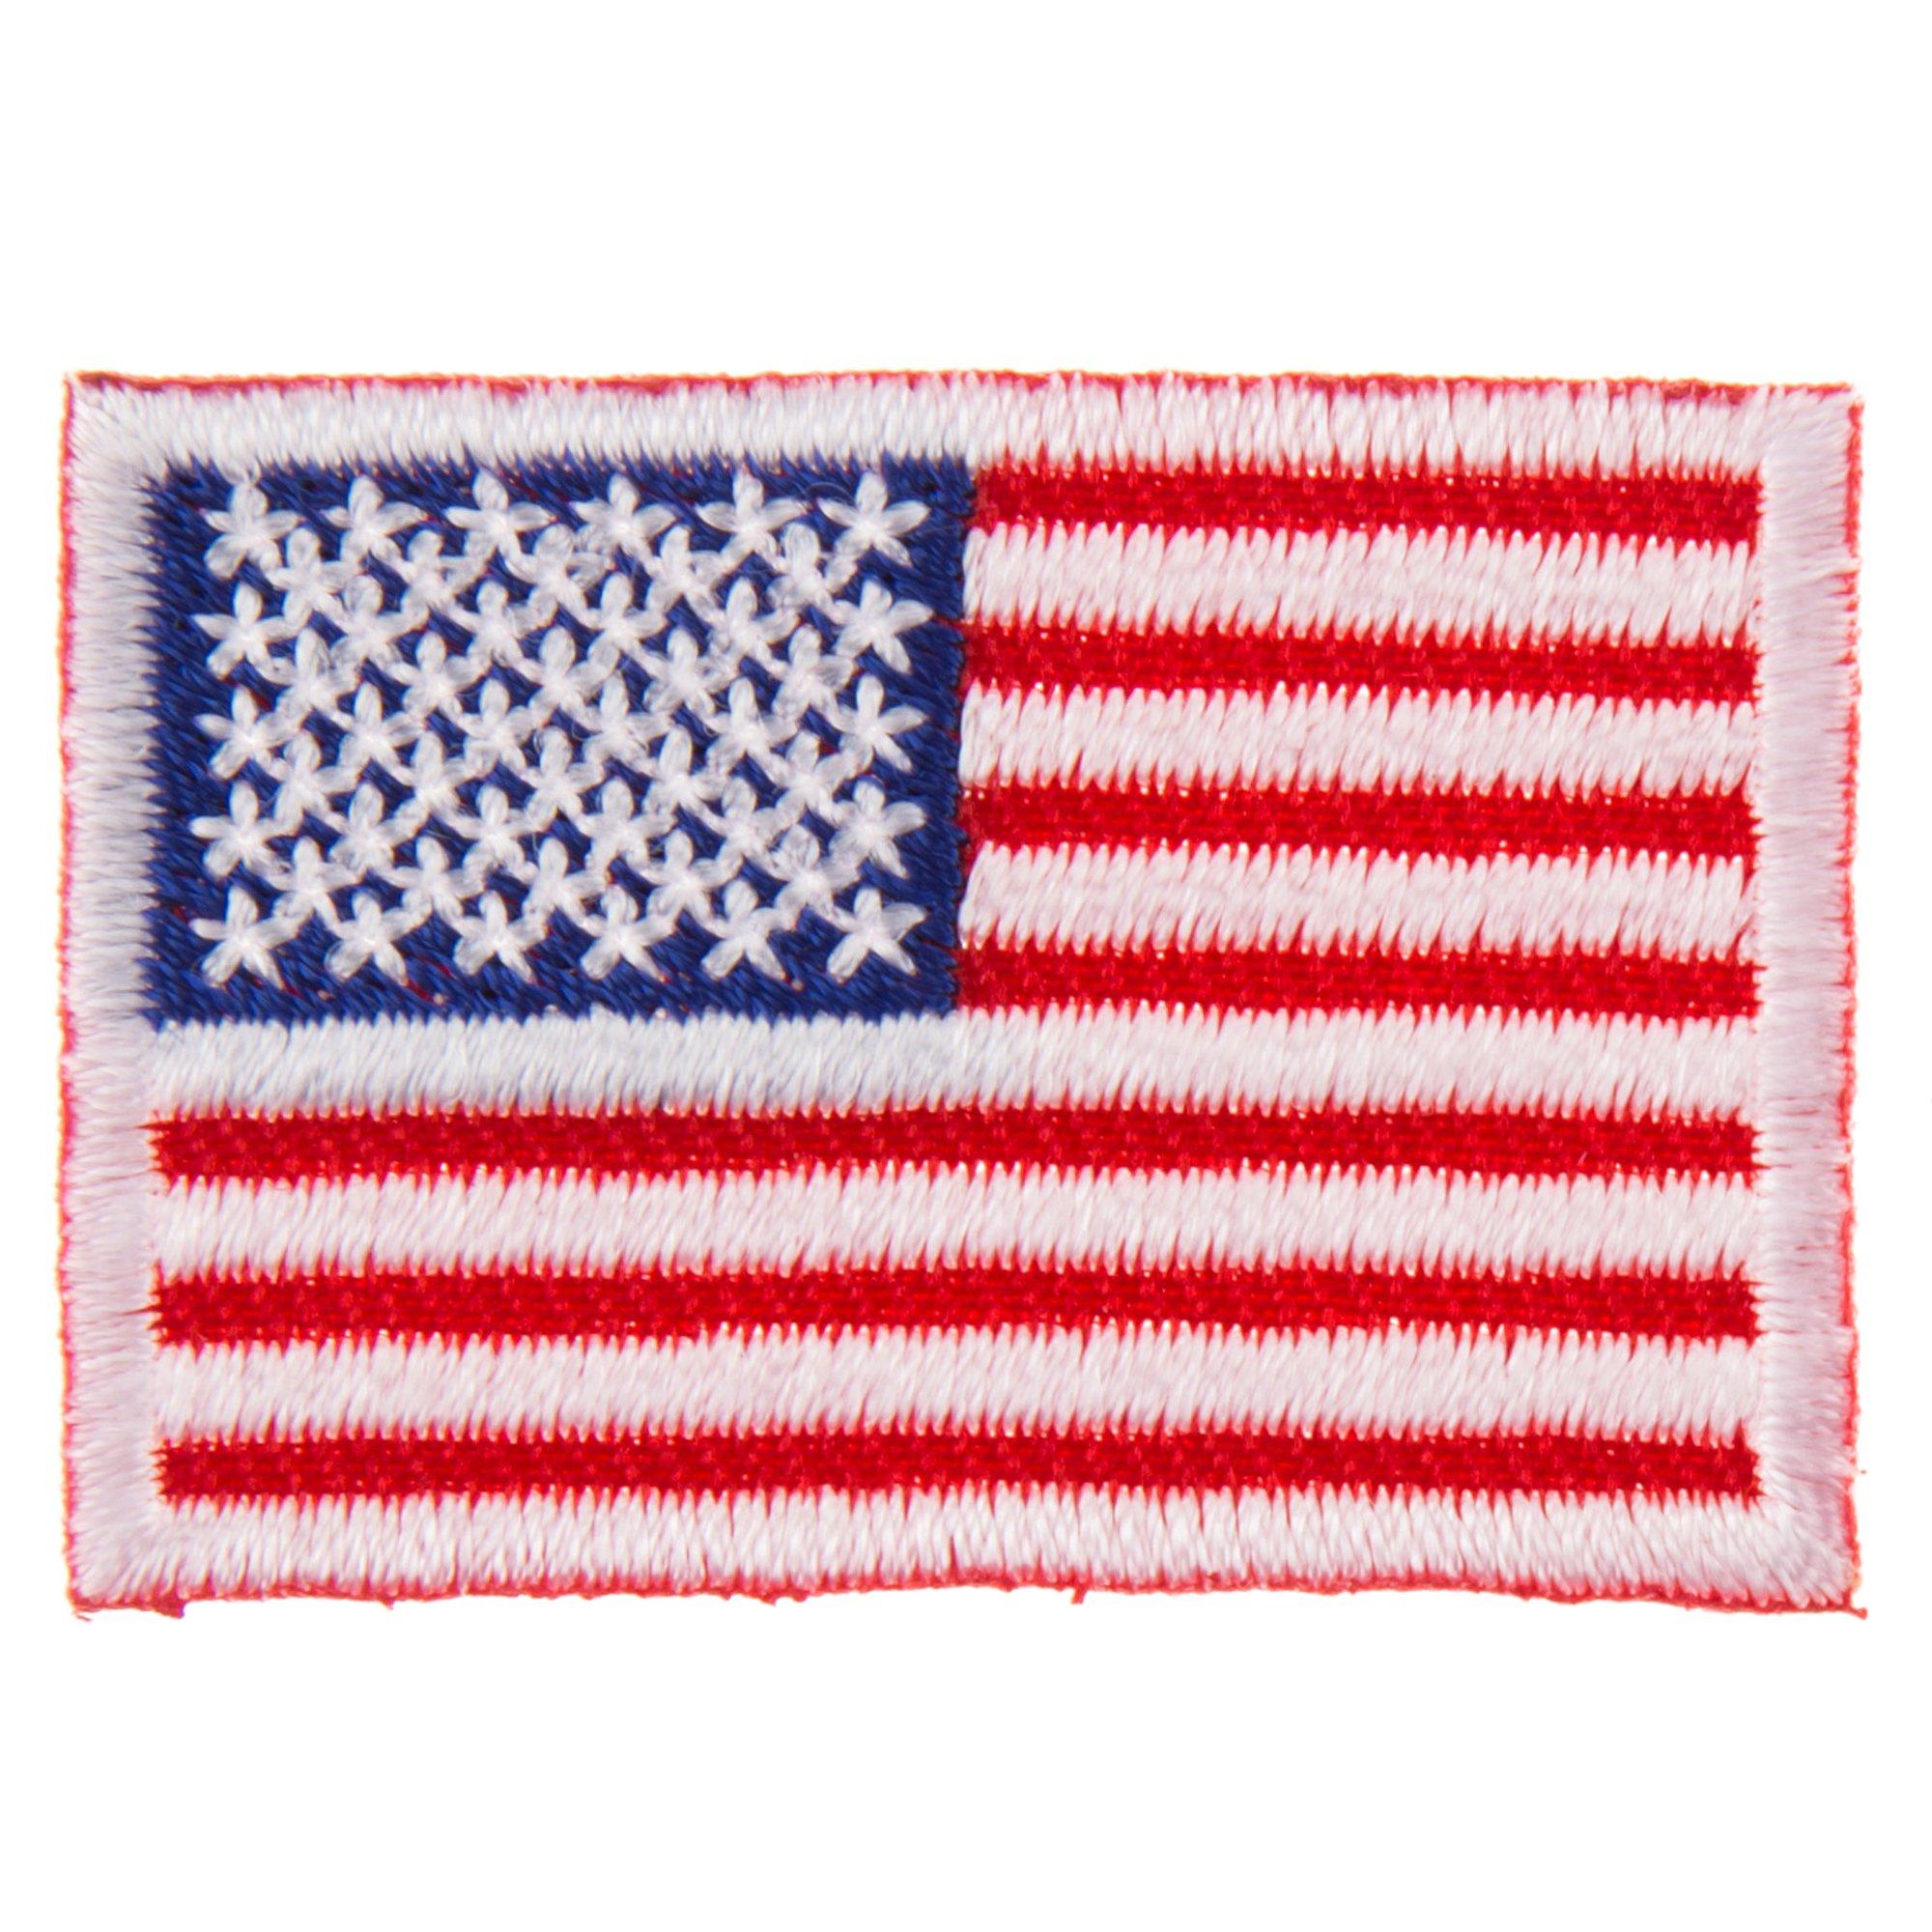 Make American Great Again US Flag Patch measures 2.5 x 3 inches and is  embroidered in red, white and blue. The Make American Great Again US patch  feature plastic iron on backing